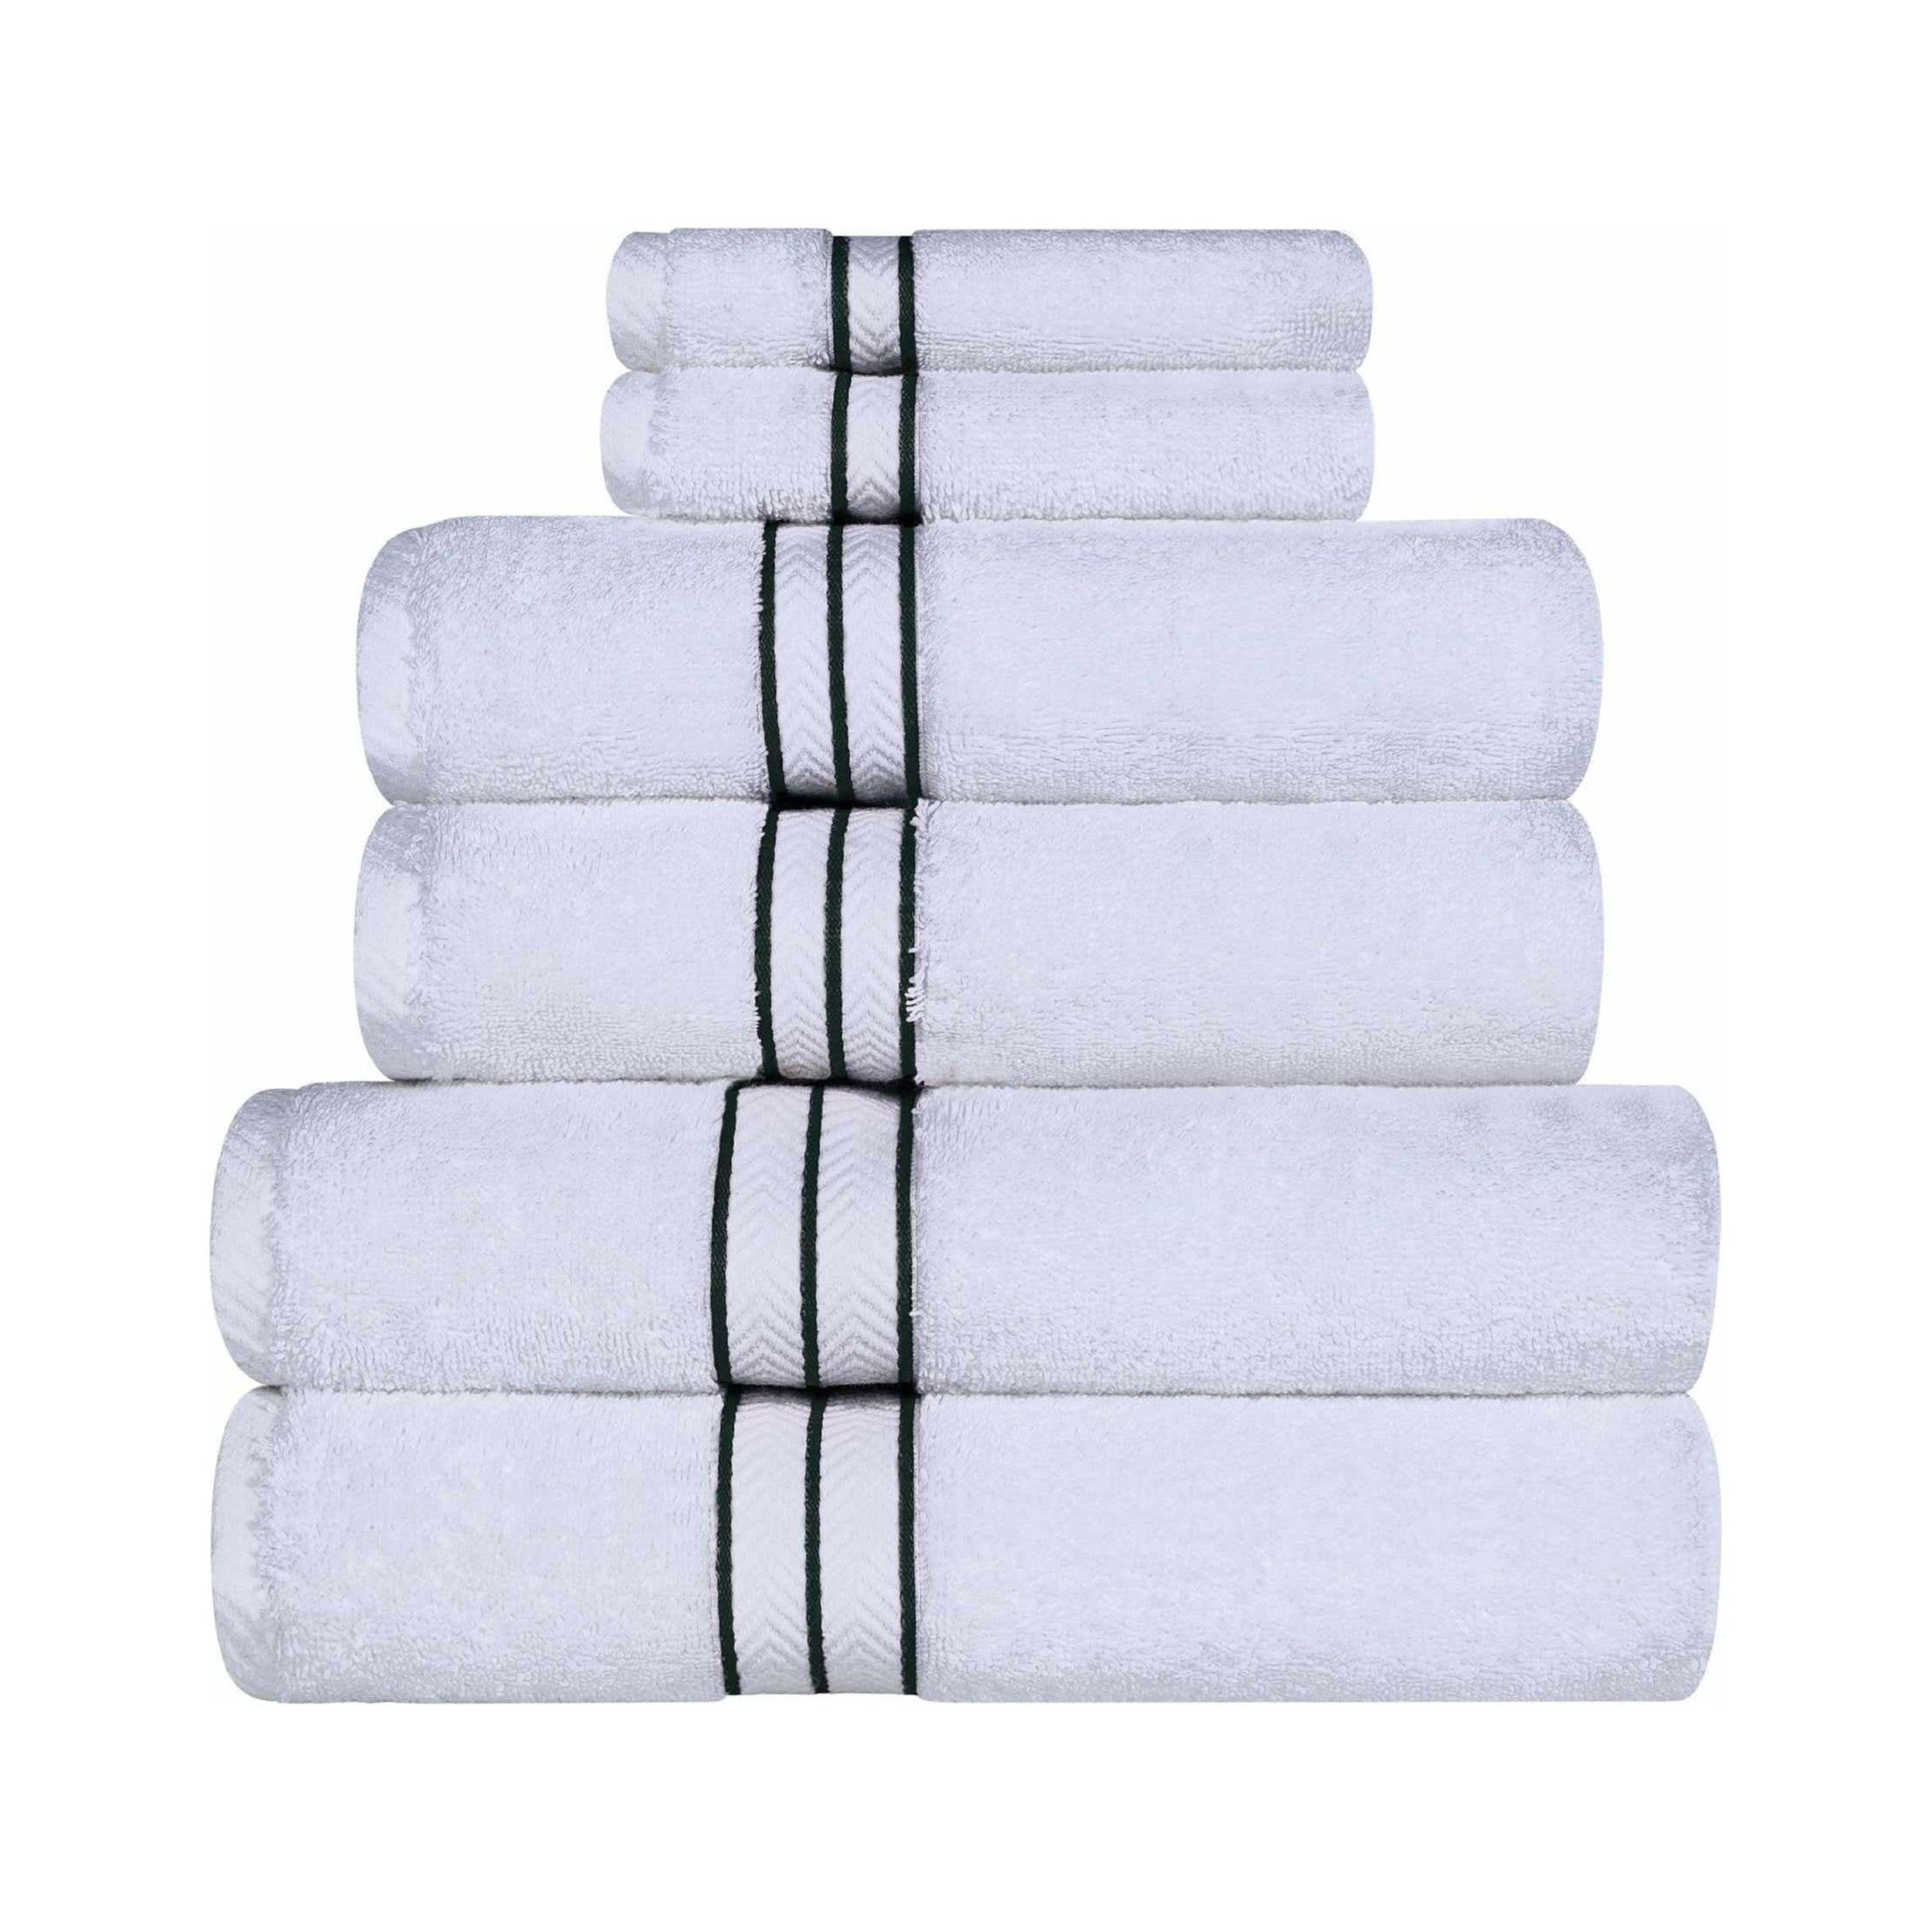 Solid Luxury Premium Cotton 900 Gsm Highly Absorbent 6 Piece Face